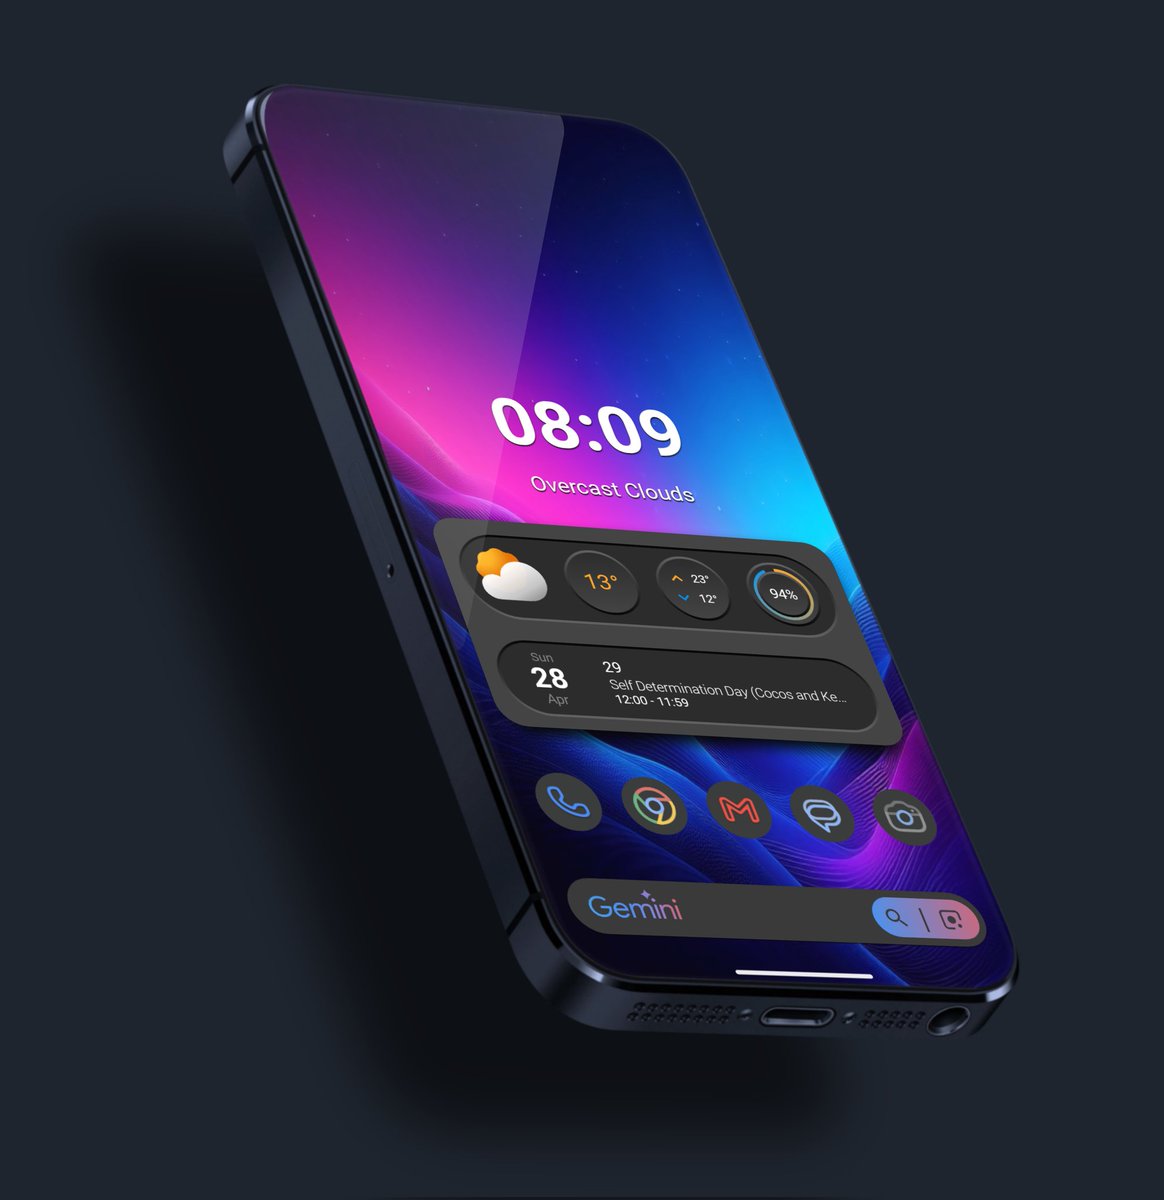 Today
Icons @pashapuma1 
Template @suryanamblass 
Wall- thanks and credit to the author 
Klwp by me